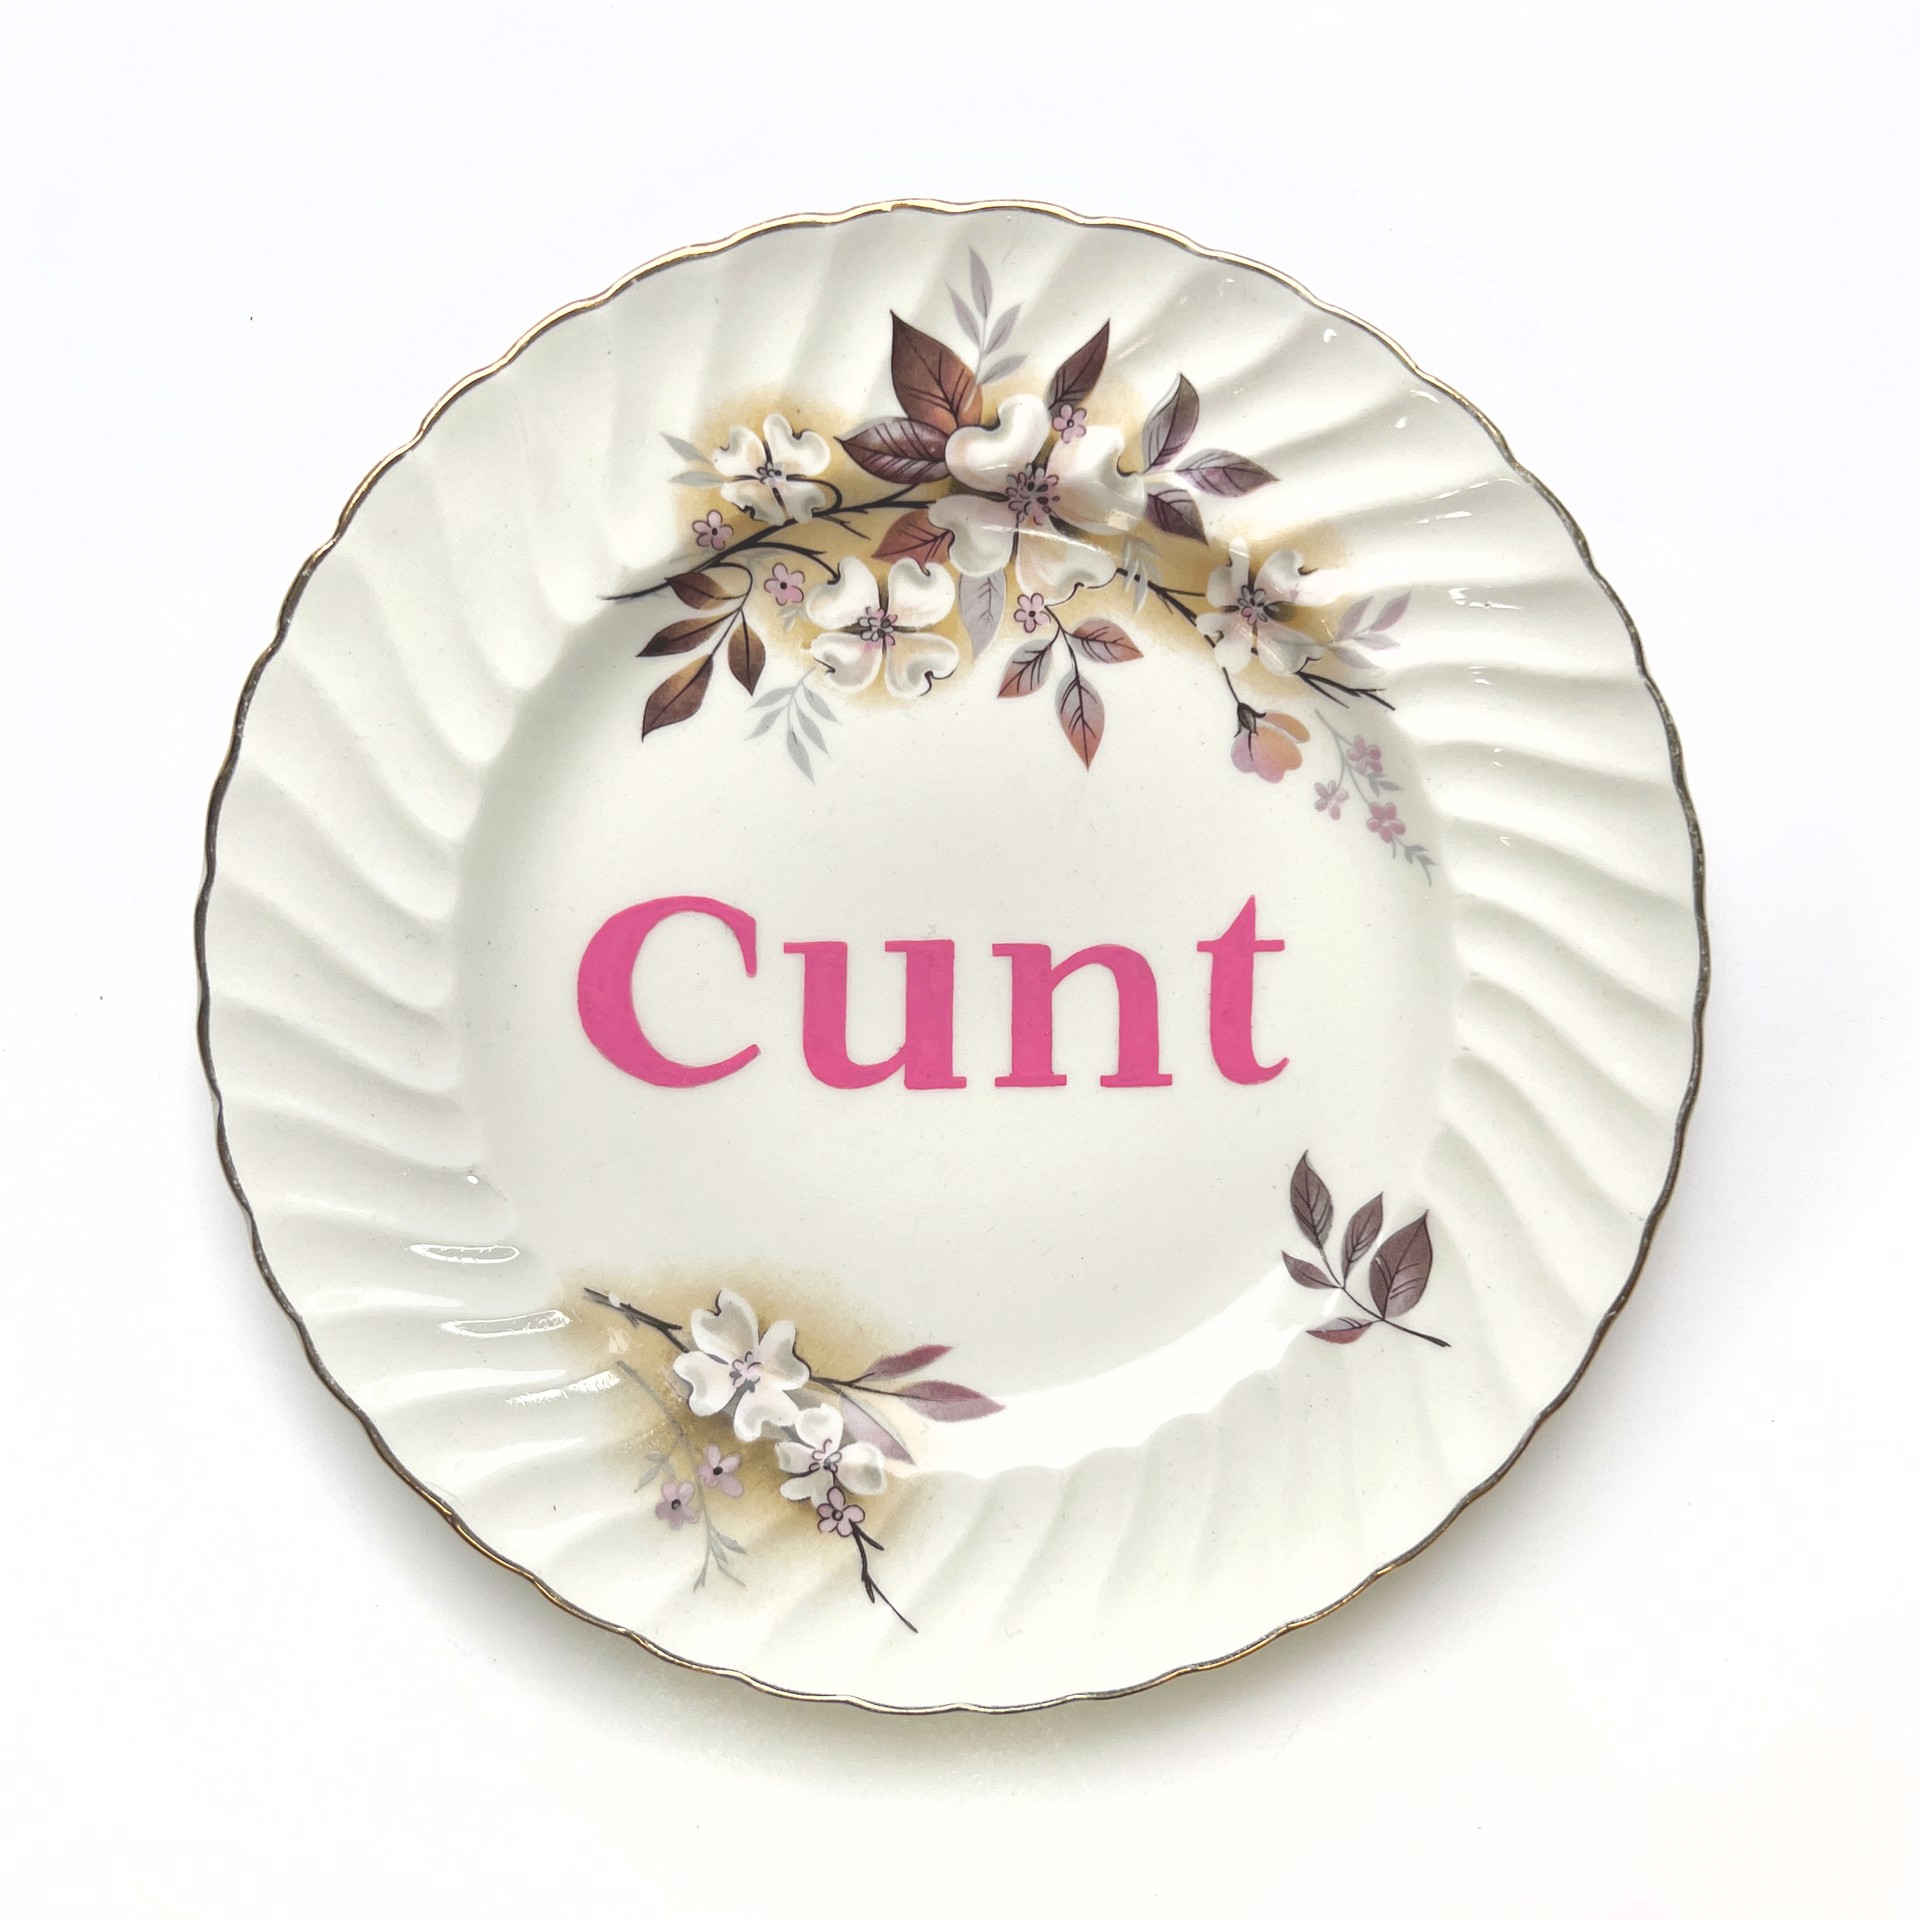 Cunt by Marie-Claude Marquis